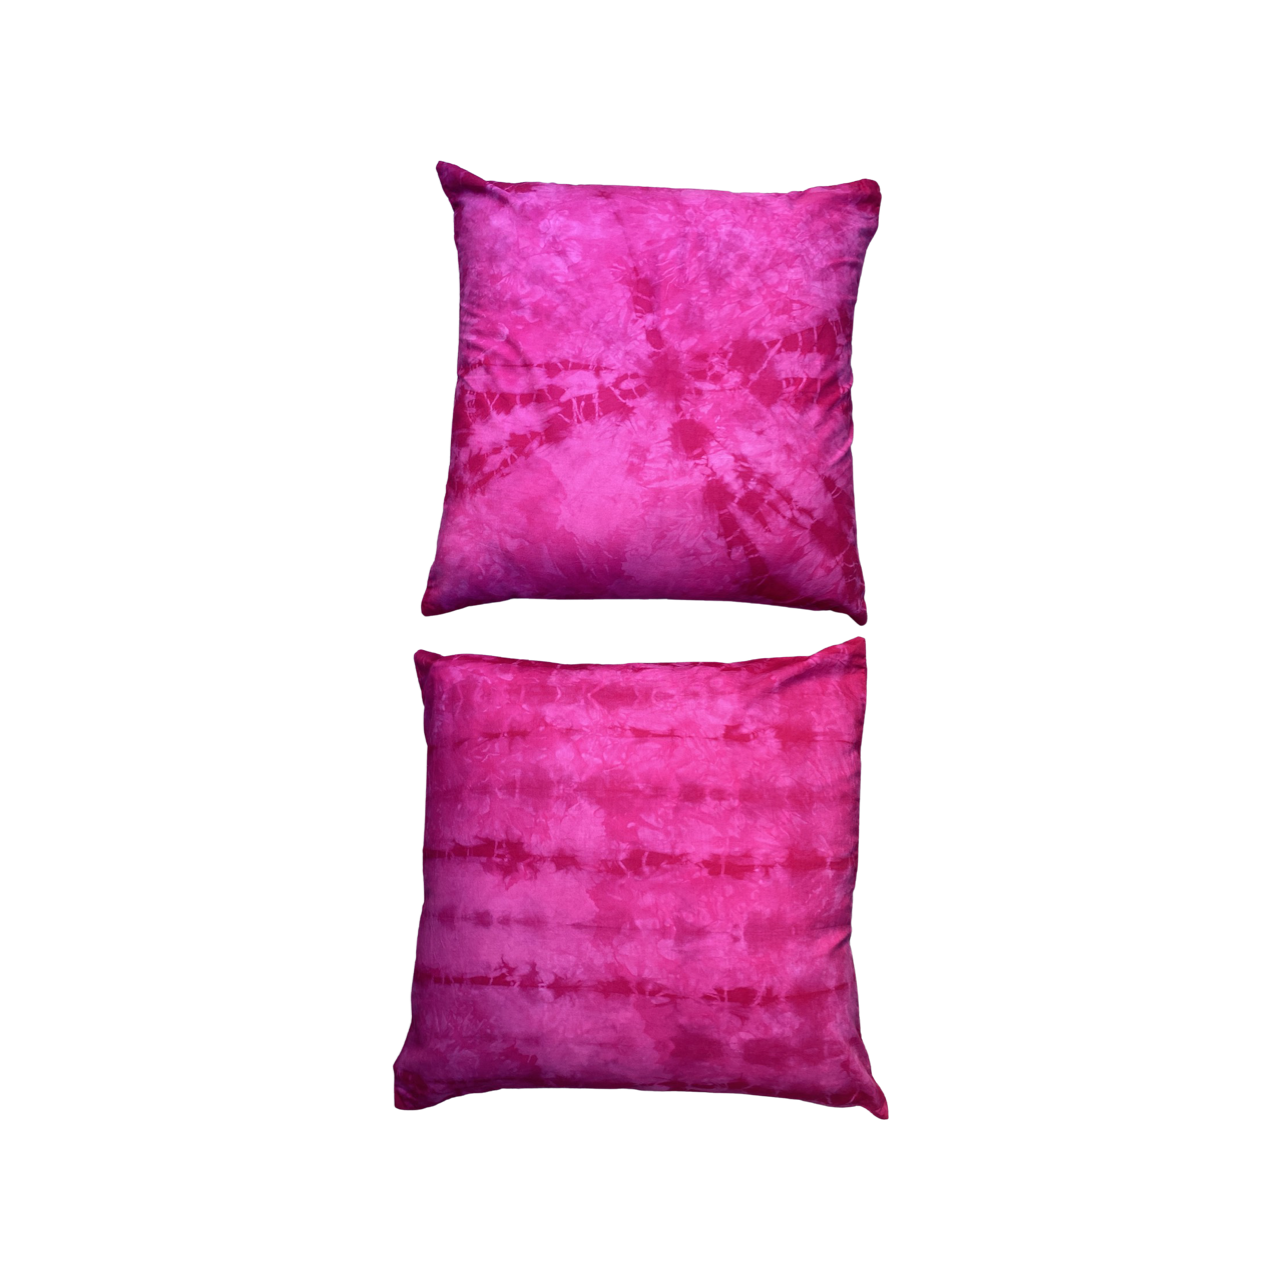 Bright Pink Tie Dye Pillowcases - Set of 2 Hand-Dyed Pillowcases - Bougainvillea Cases by 1 Life